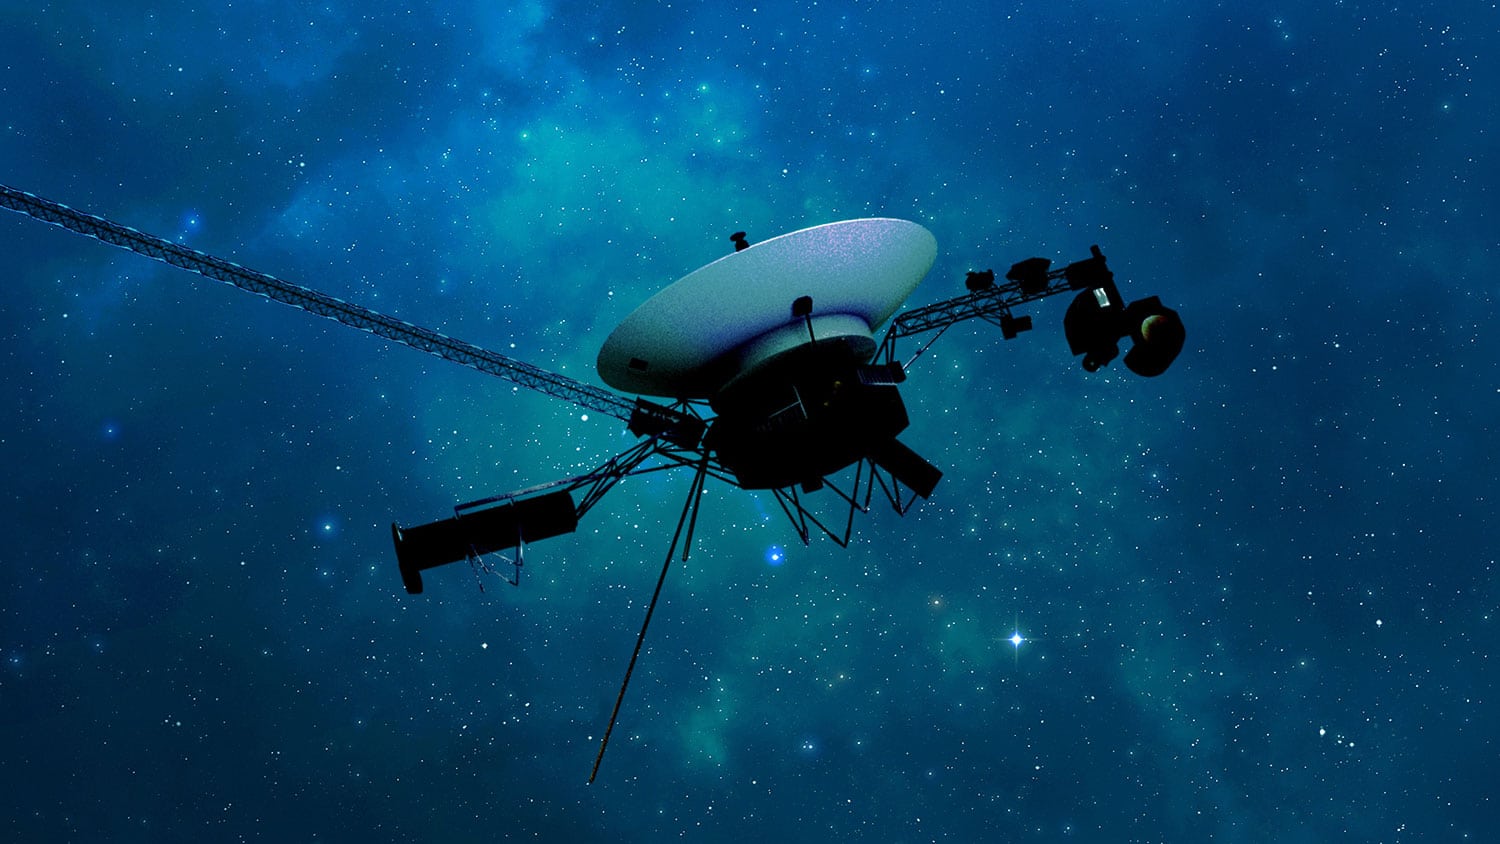 NASA’s Voyager 1 spacecraft is depicted in this artist’s concept traveling through interstellar space, or the space between stars, which it entered in 2012.